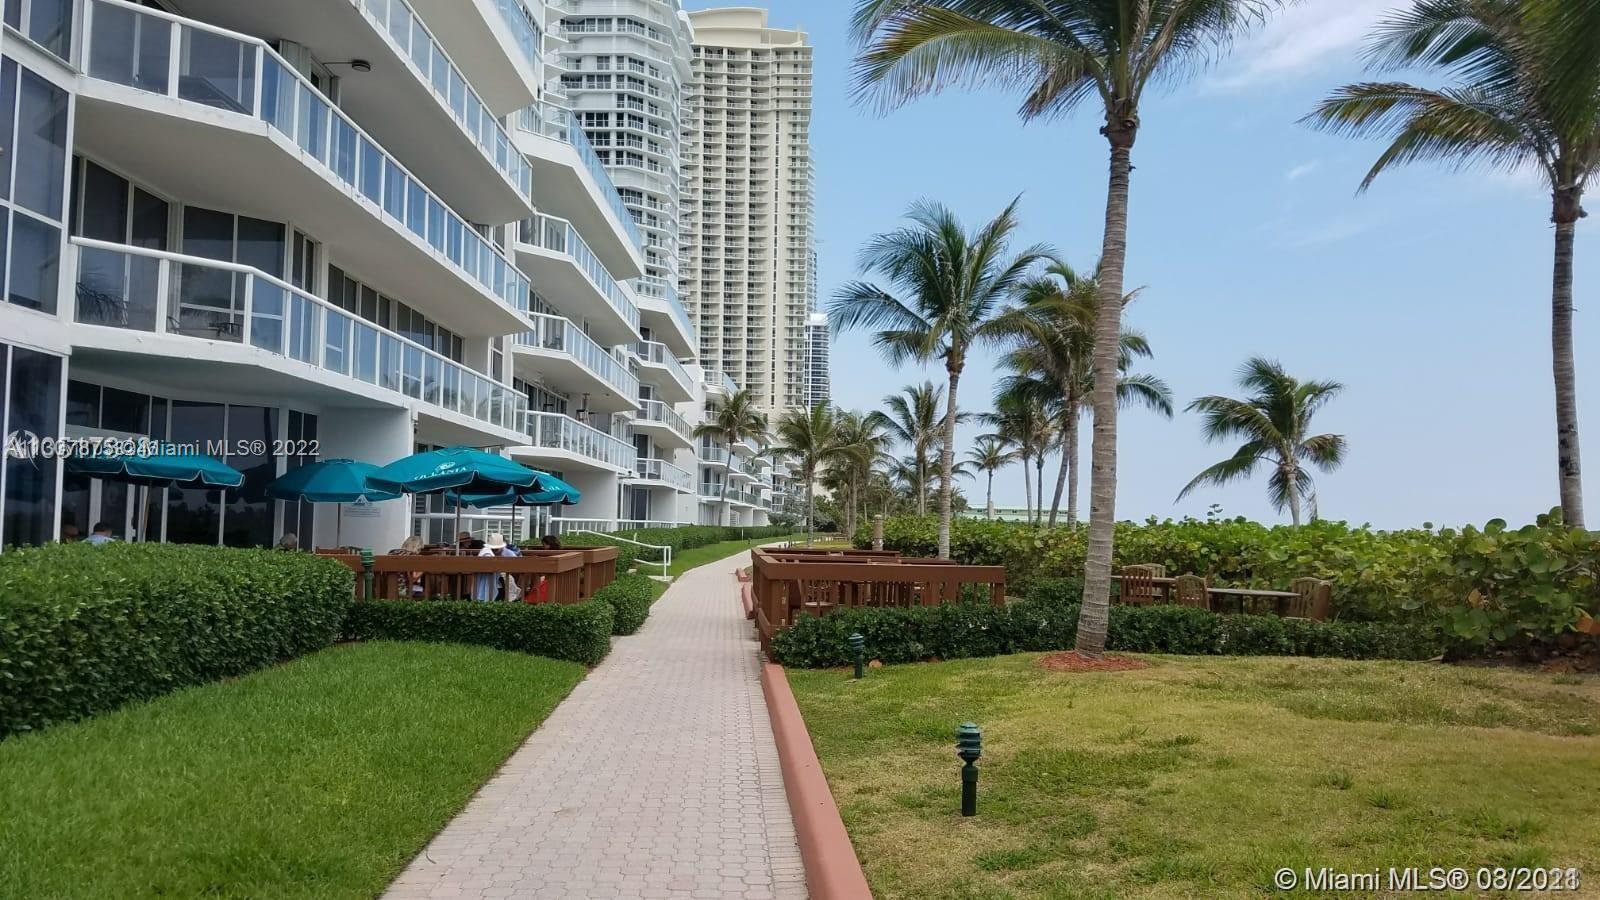 SPECTACULAR 3 BED / 3 BATH, CORNER OCEANFRONT MASTERPIECE, COMPLETELY UPGRADED PROFESSIONALLY DESIGN